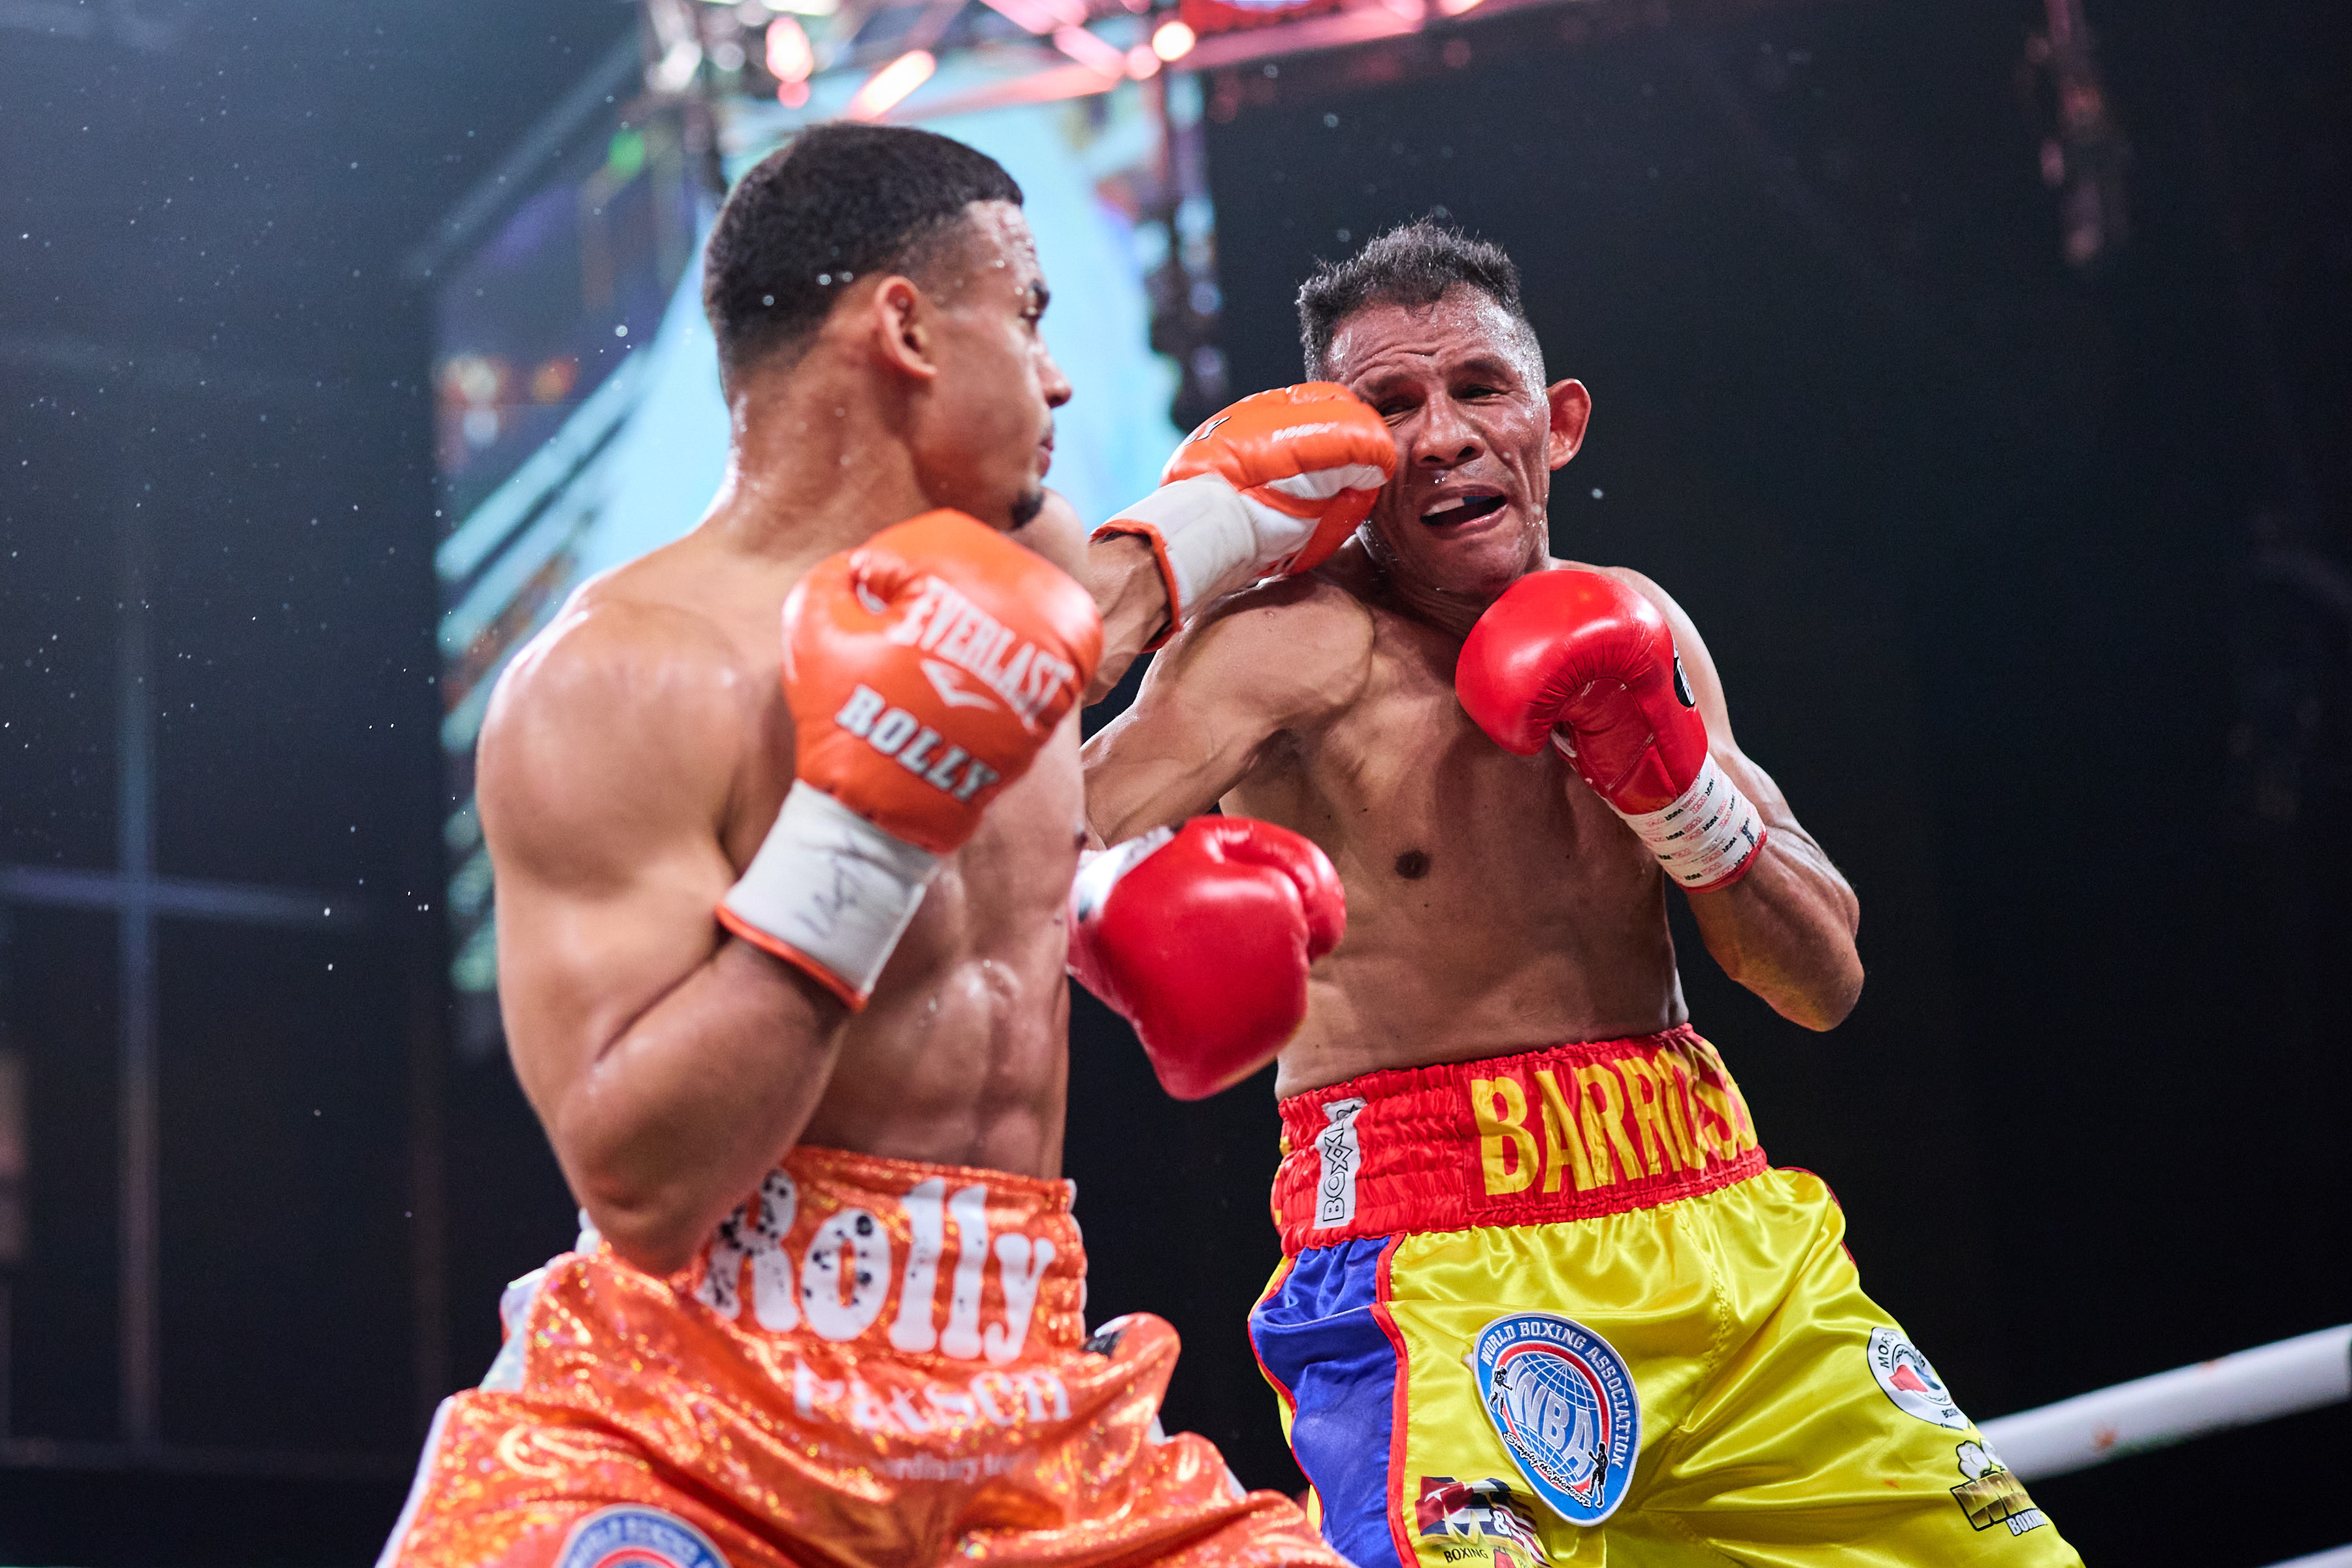 Boxing: How Much Money Did Rolly Romero Earn by Beating Ismael Barroso?